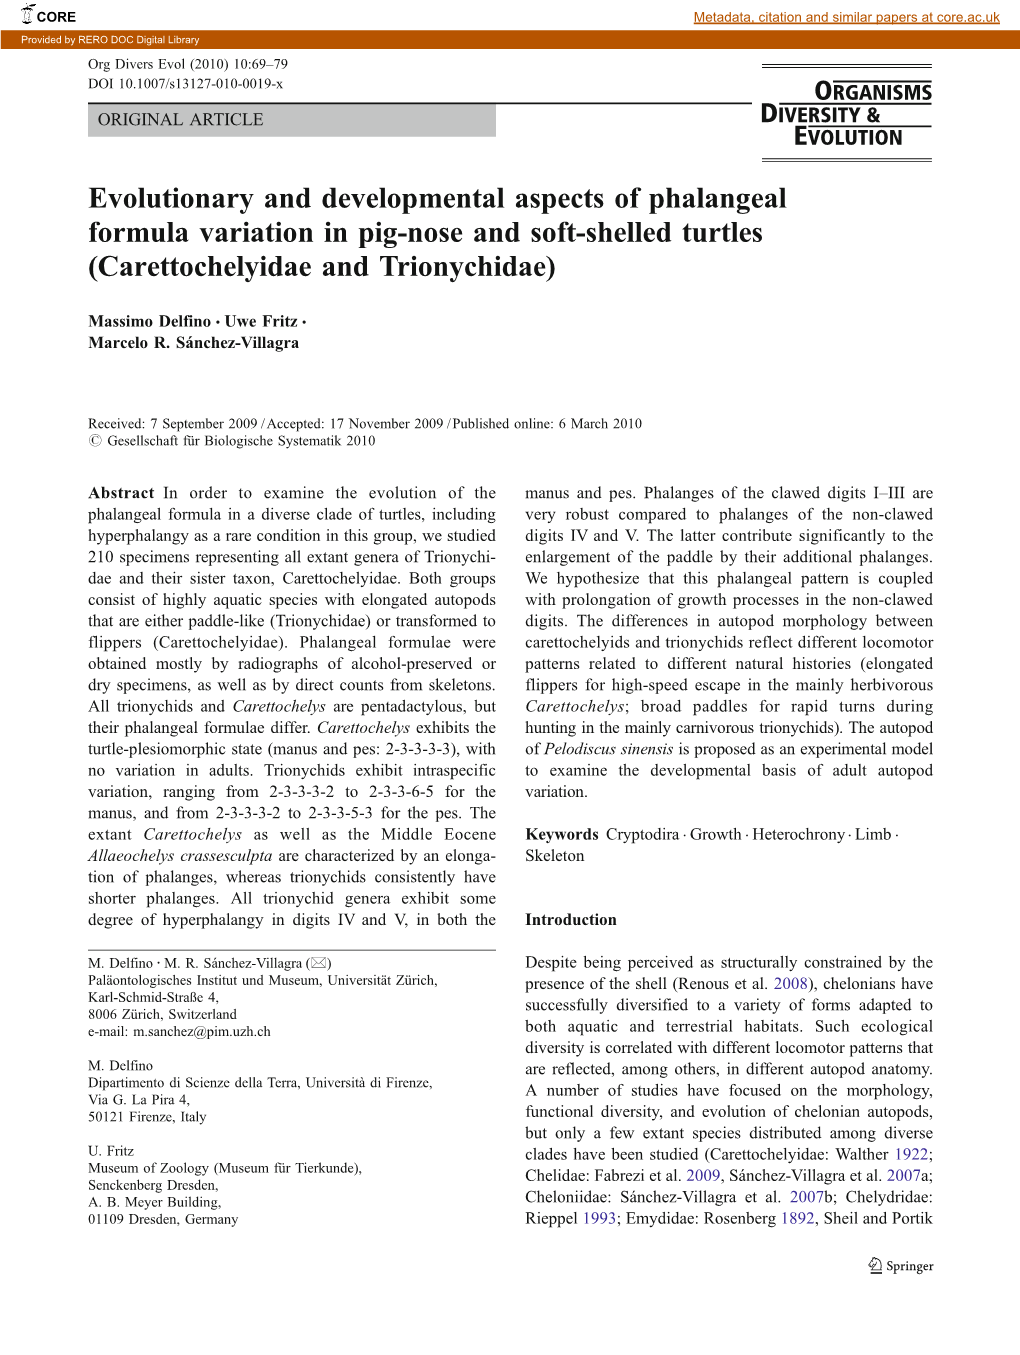 Evolutionary and Developmental Aspects of Phalangeal Formula Variation in Pig-Nose and Soft-Shelled Turtles (Carettochelyidae and Trionychidae)